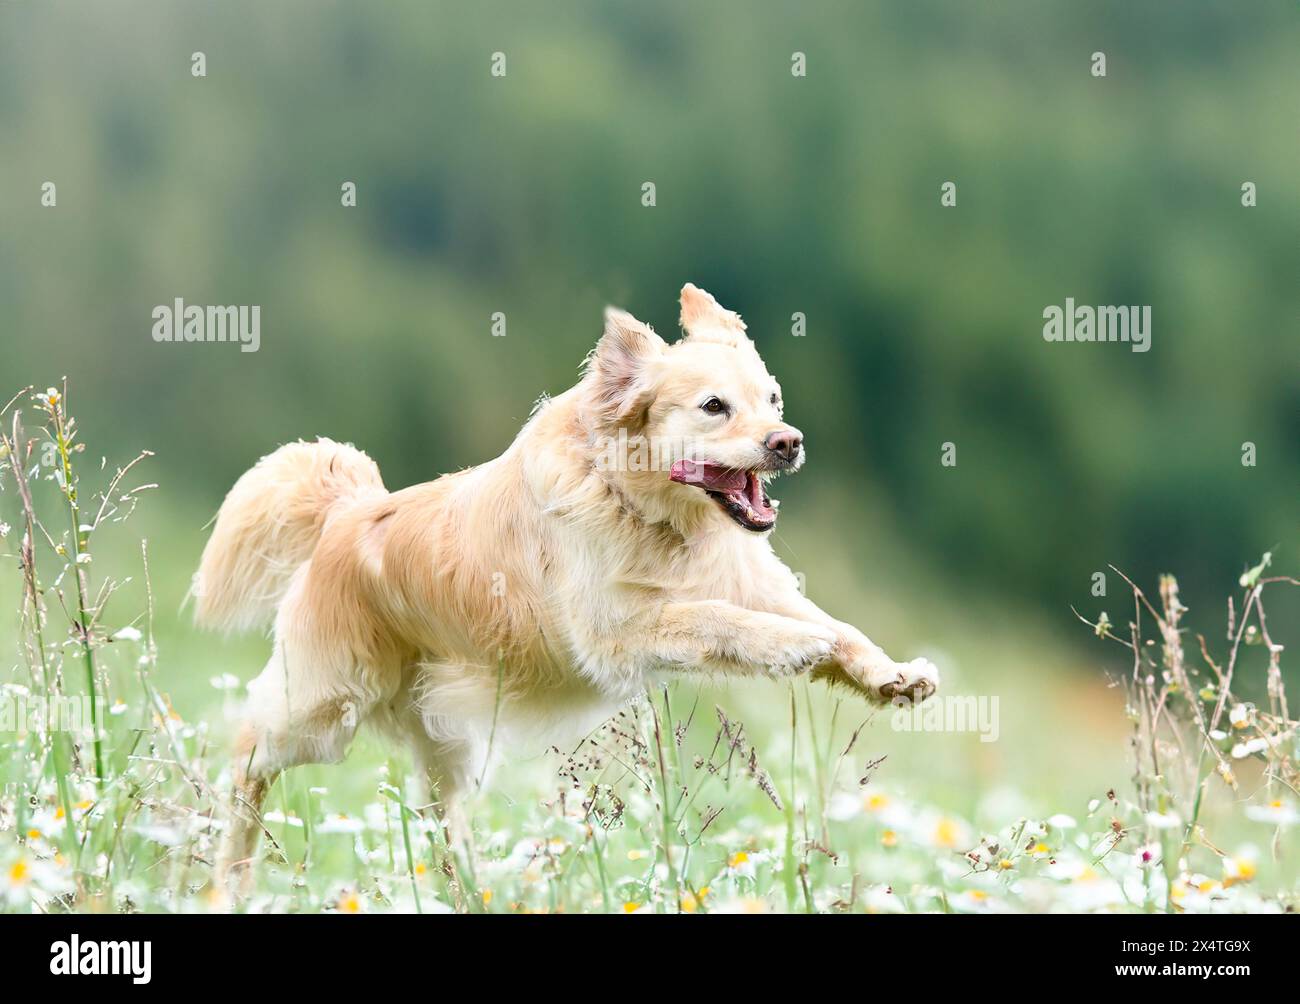 dog training  for obedience discipline with a golden retriever Stock Photo